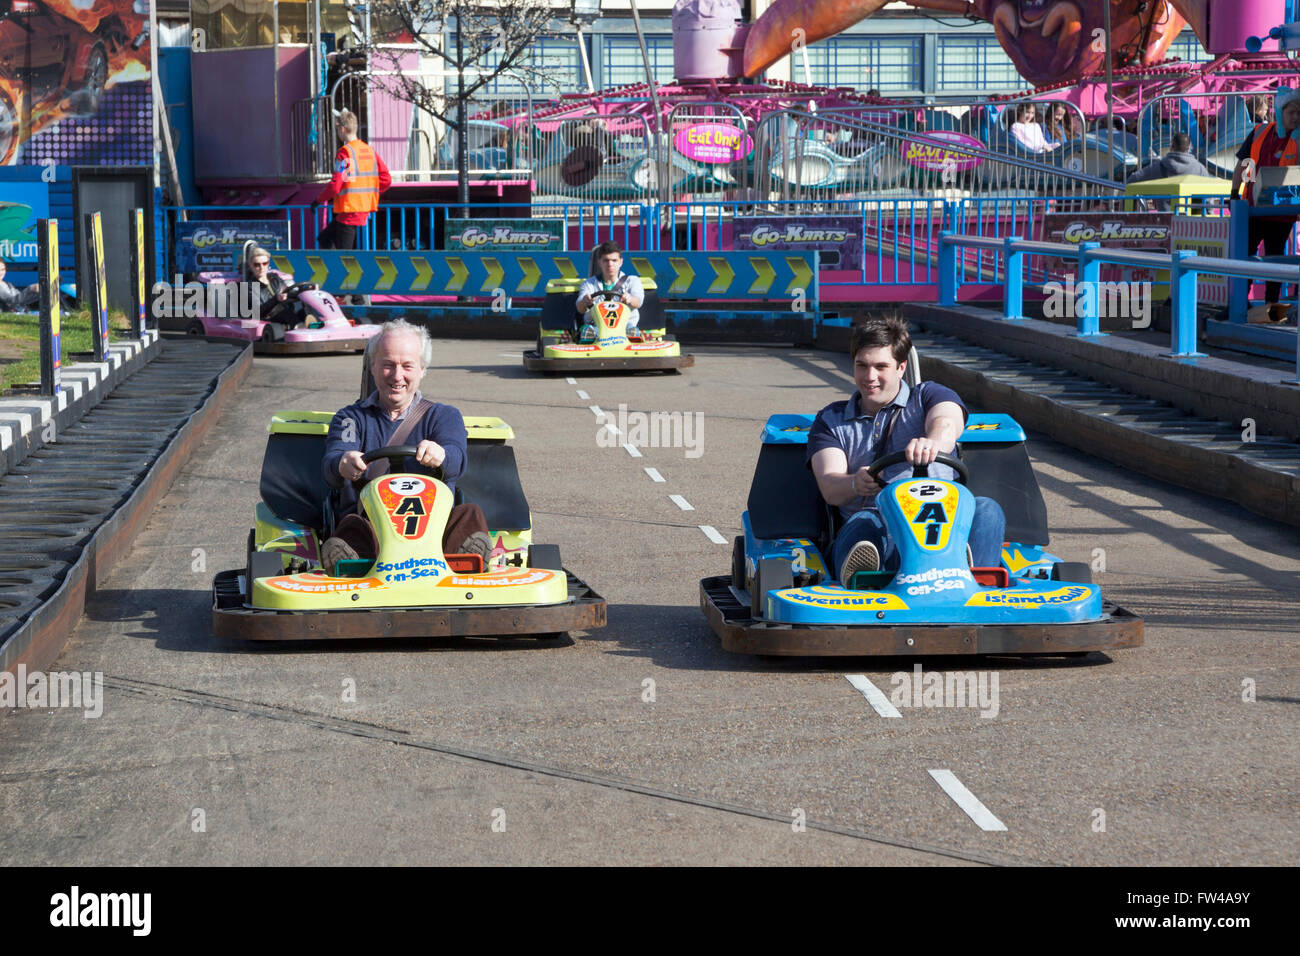 Grandfather and grandson competing in go karts Stock Photo